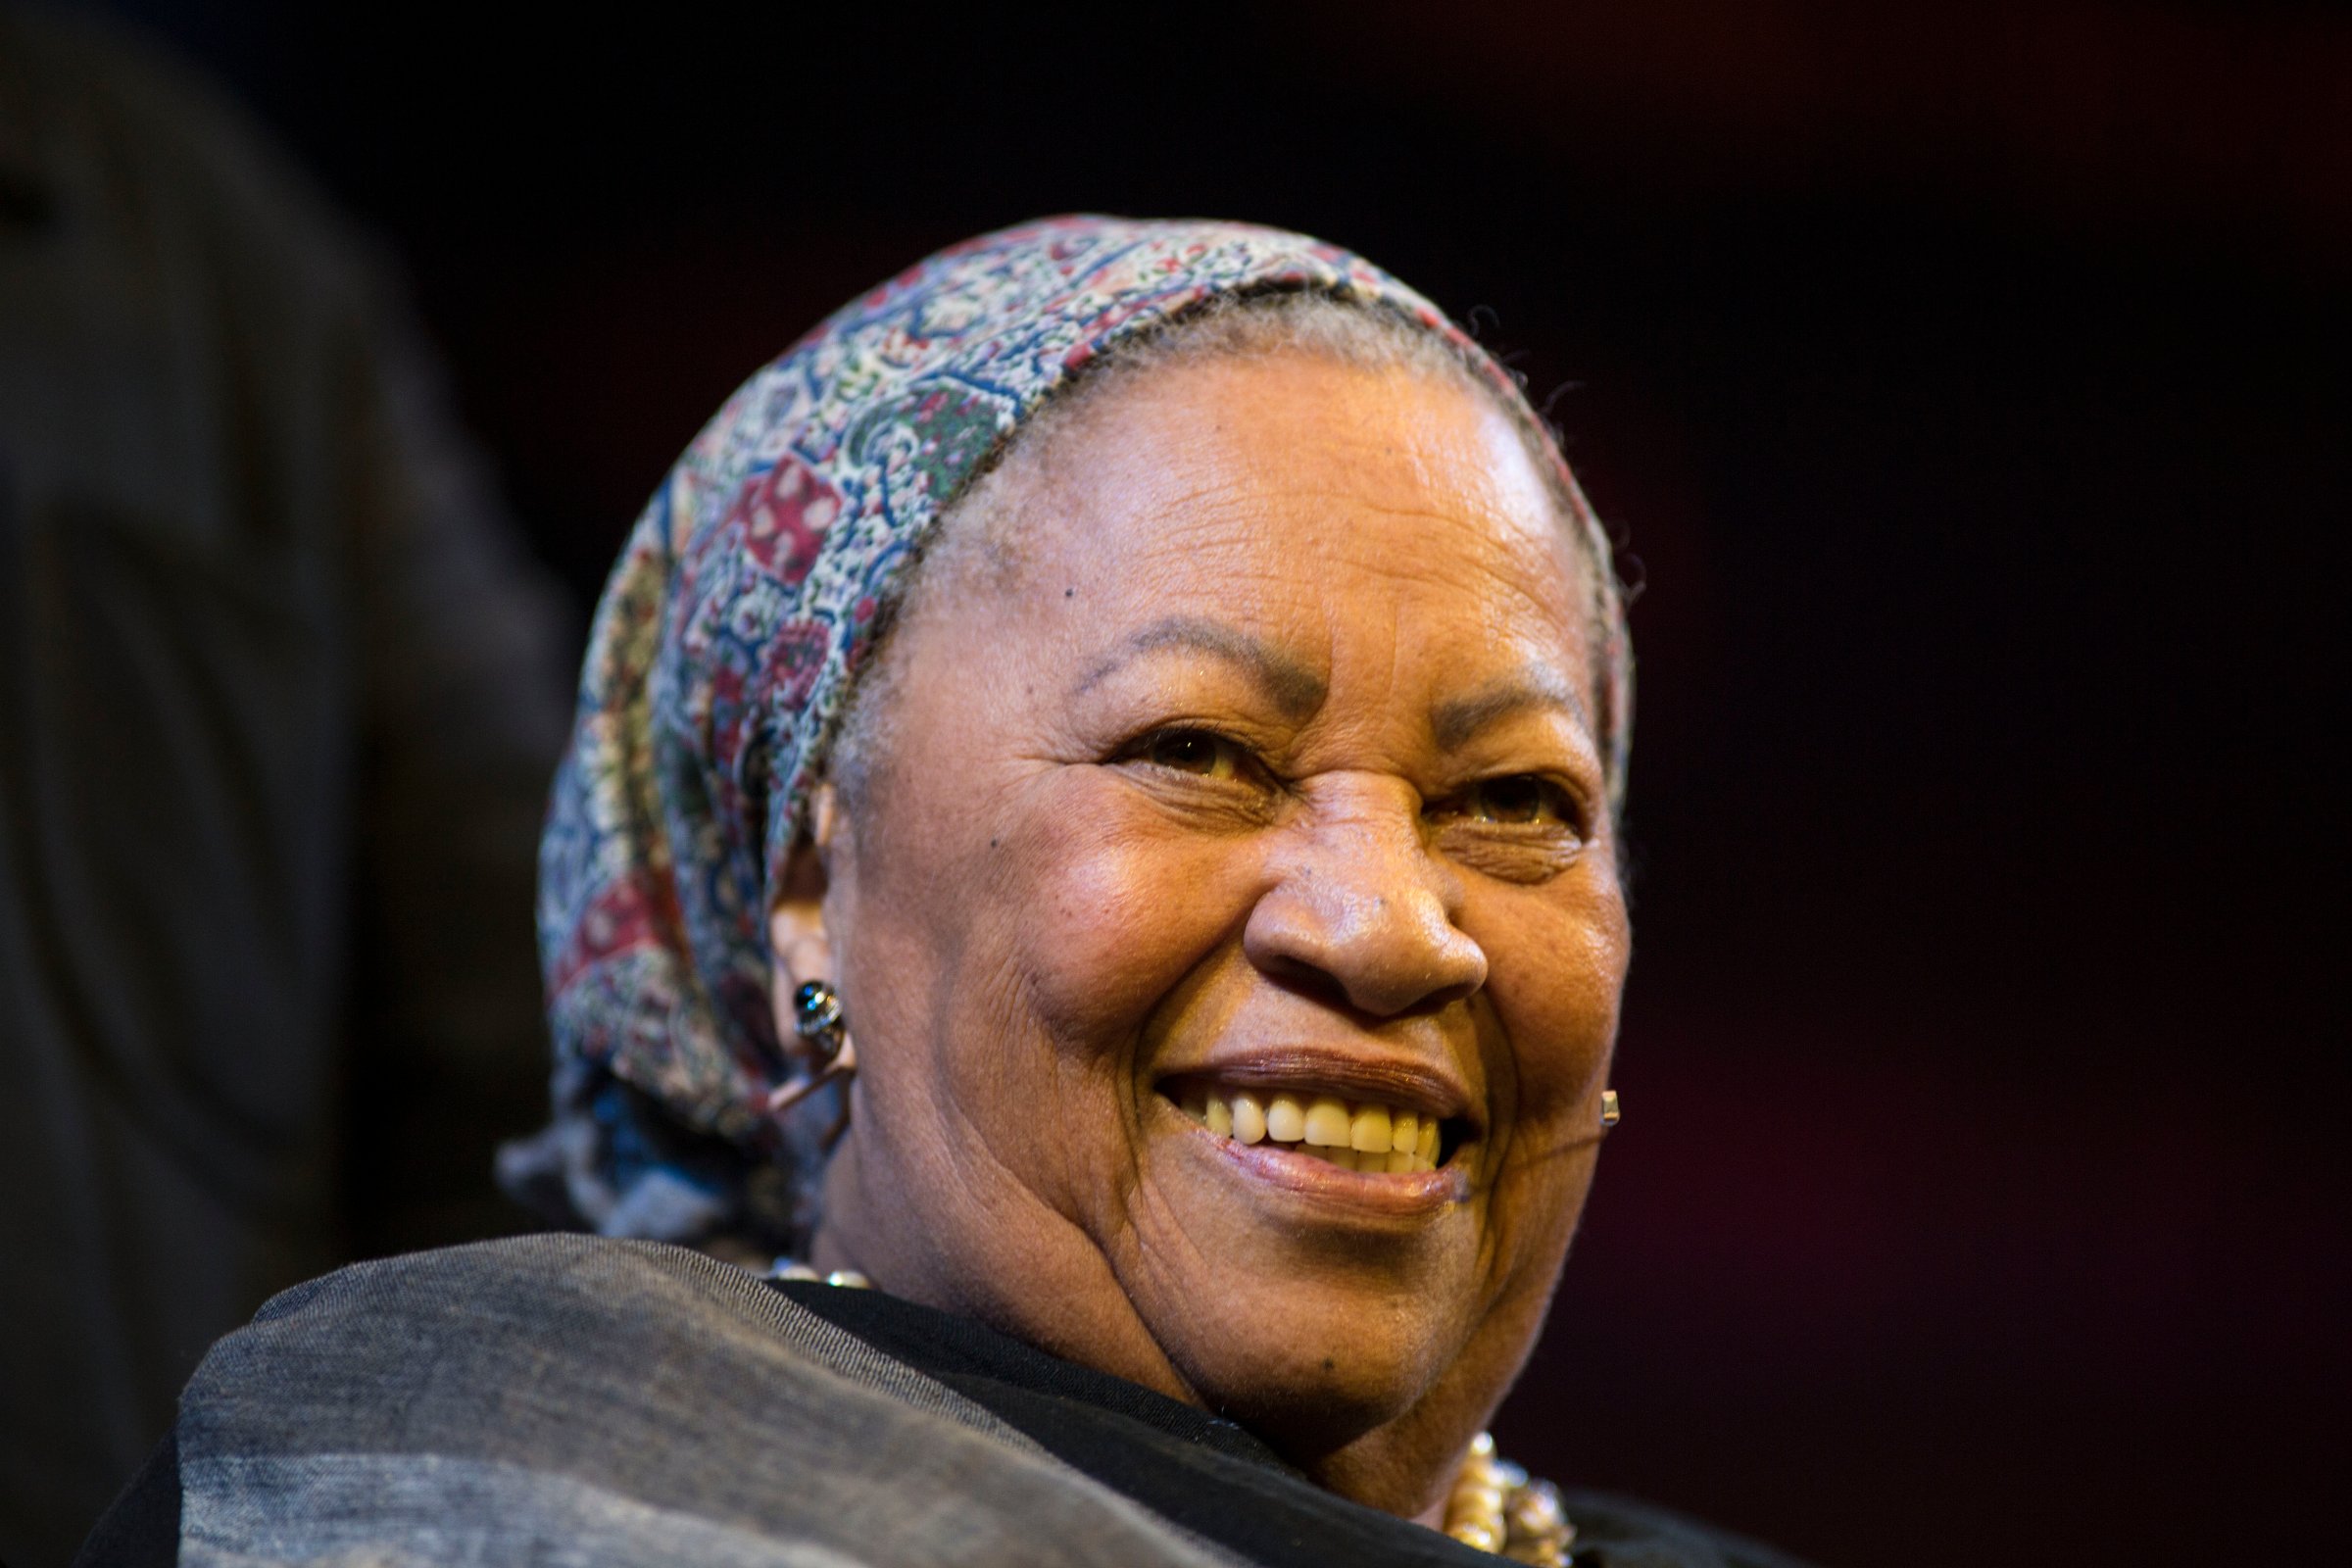 Toni Morrison, Nobel prize winning novelist, at the Hay Festival on May 27, 2014 in Hay-on-Wye, Wales.